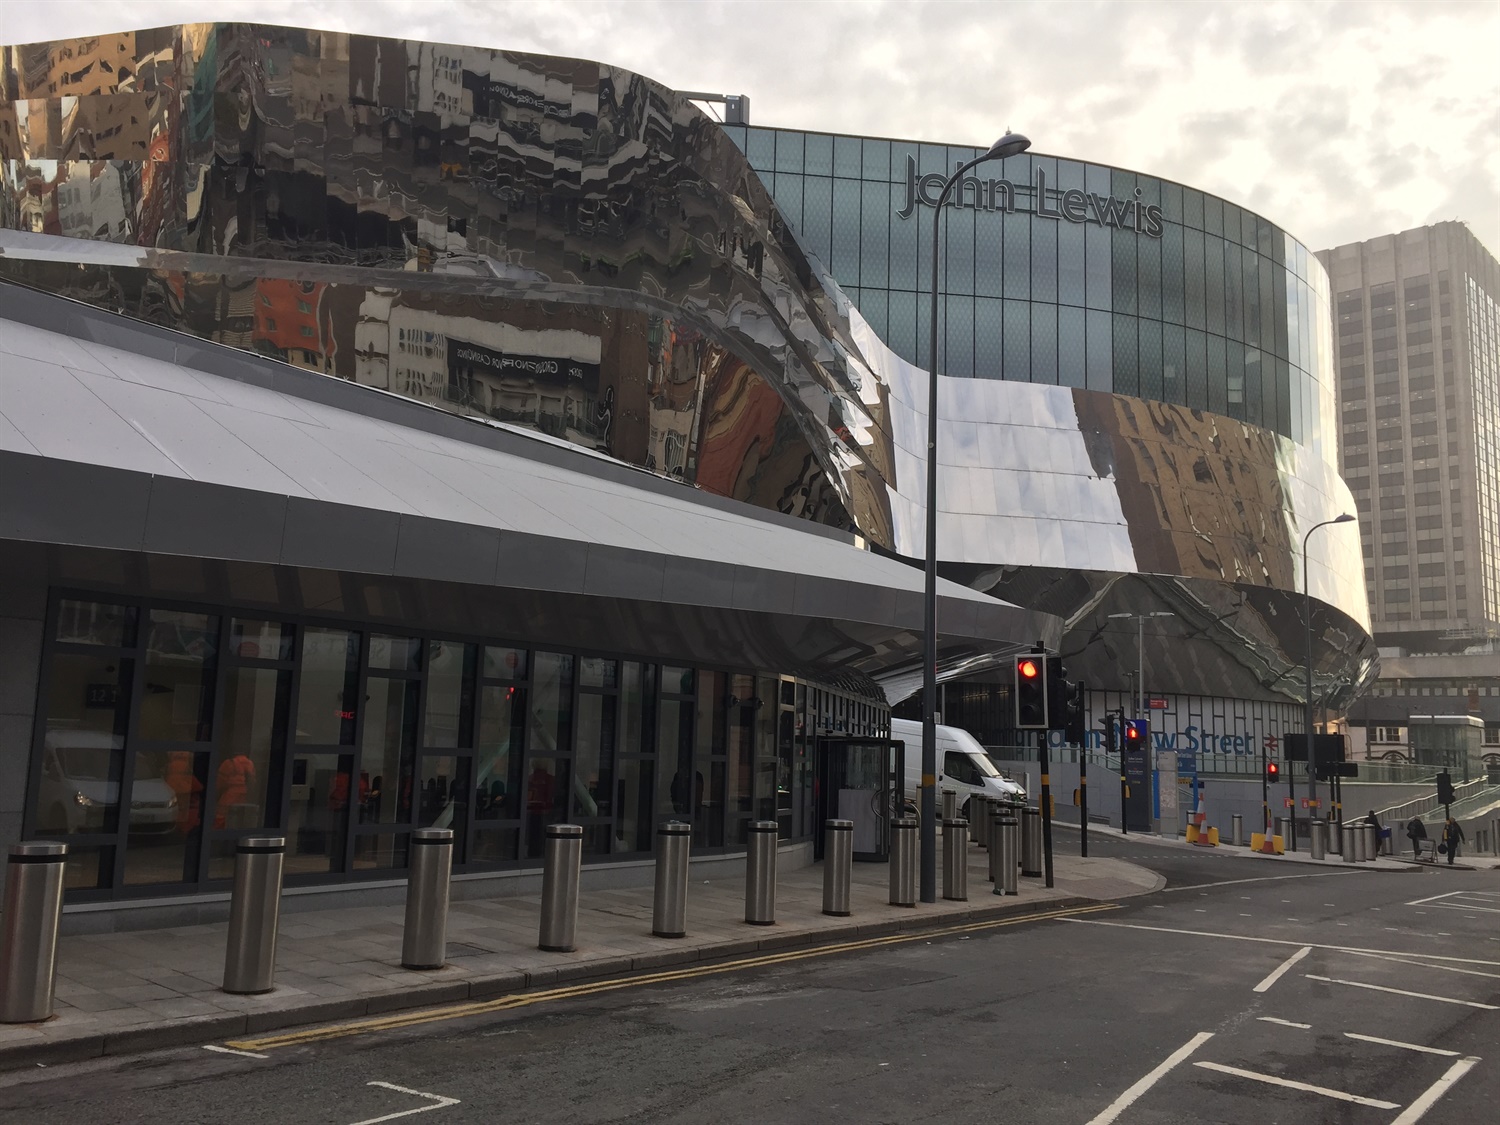 New exit opened as part of Birmingham New Street redevelopment